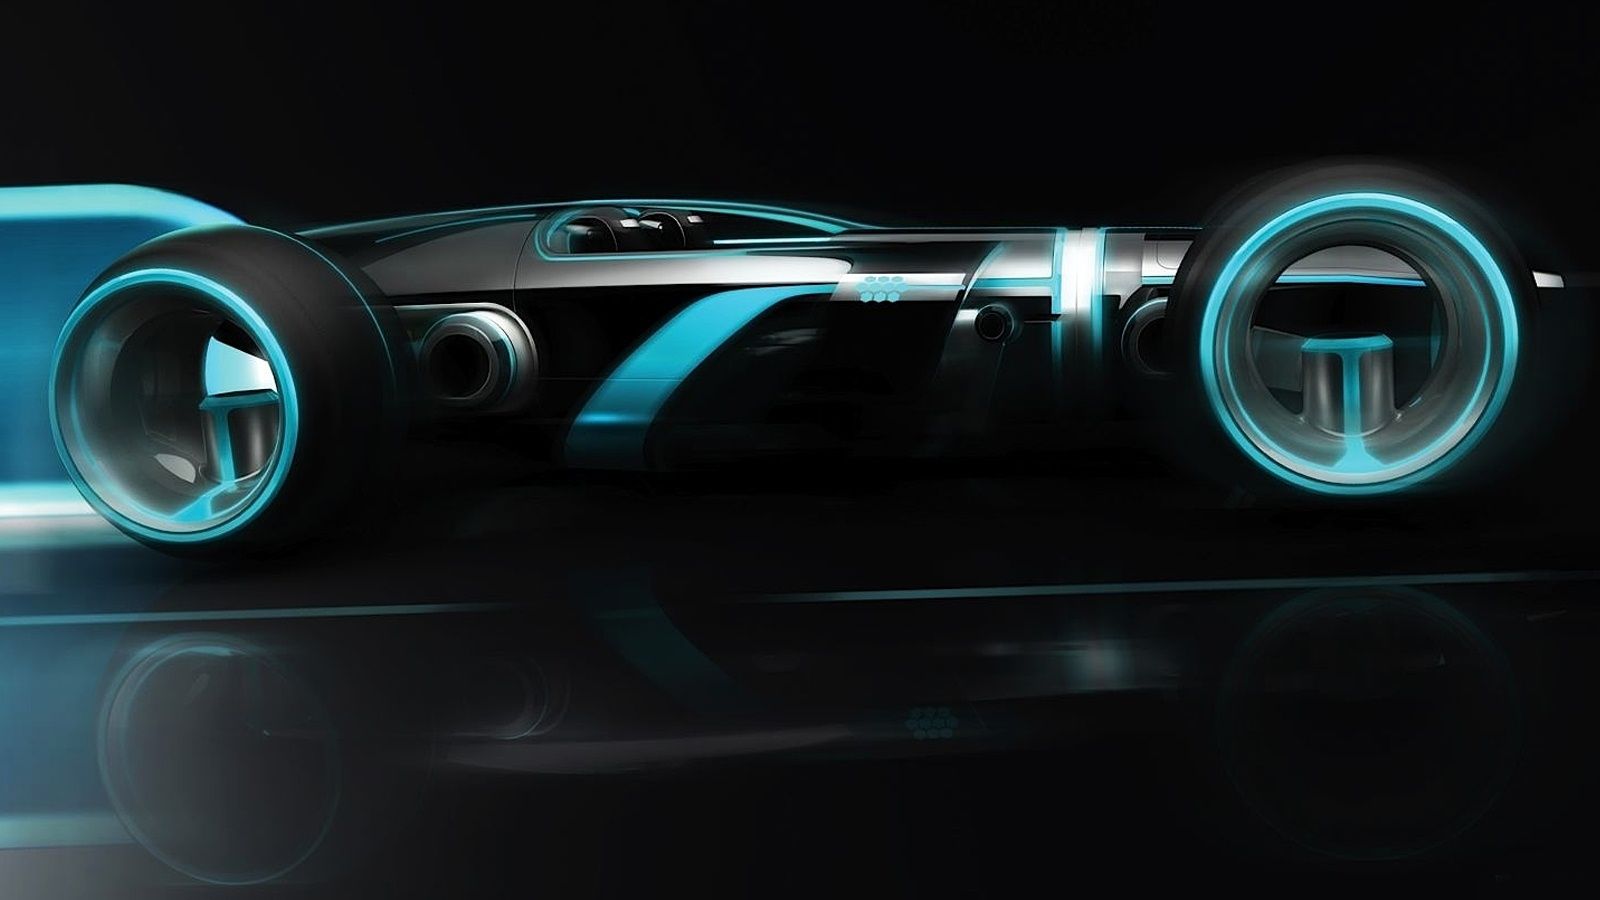 Tron Super Lightcycle HD Wallpapers | HD Wallpapers